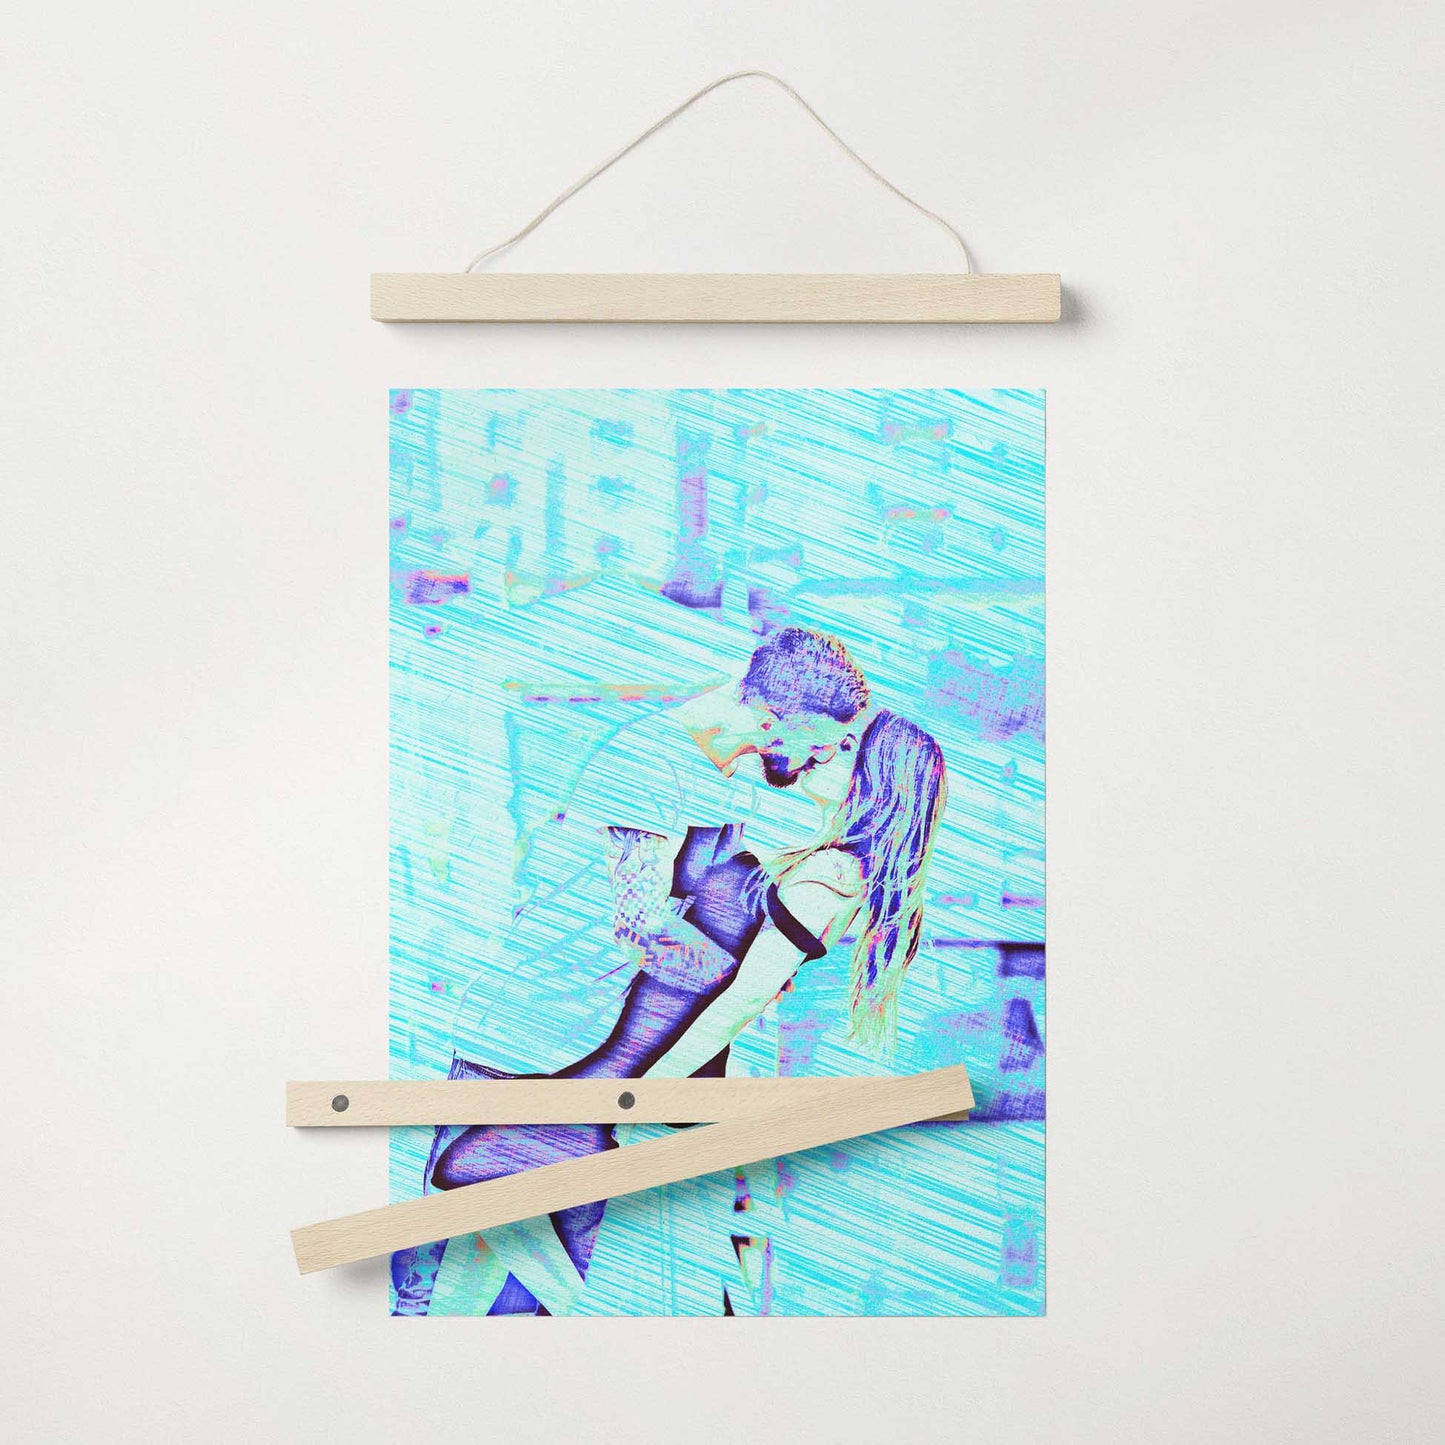 Make a statement with the Personalised Blue Drawing Poster Hanger. This cool and fresh wall art showcases a drawing created from your photo, enhanced with a pencil effect and vibrant blue hues. Its vivid colors and playful design evoke happiness